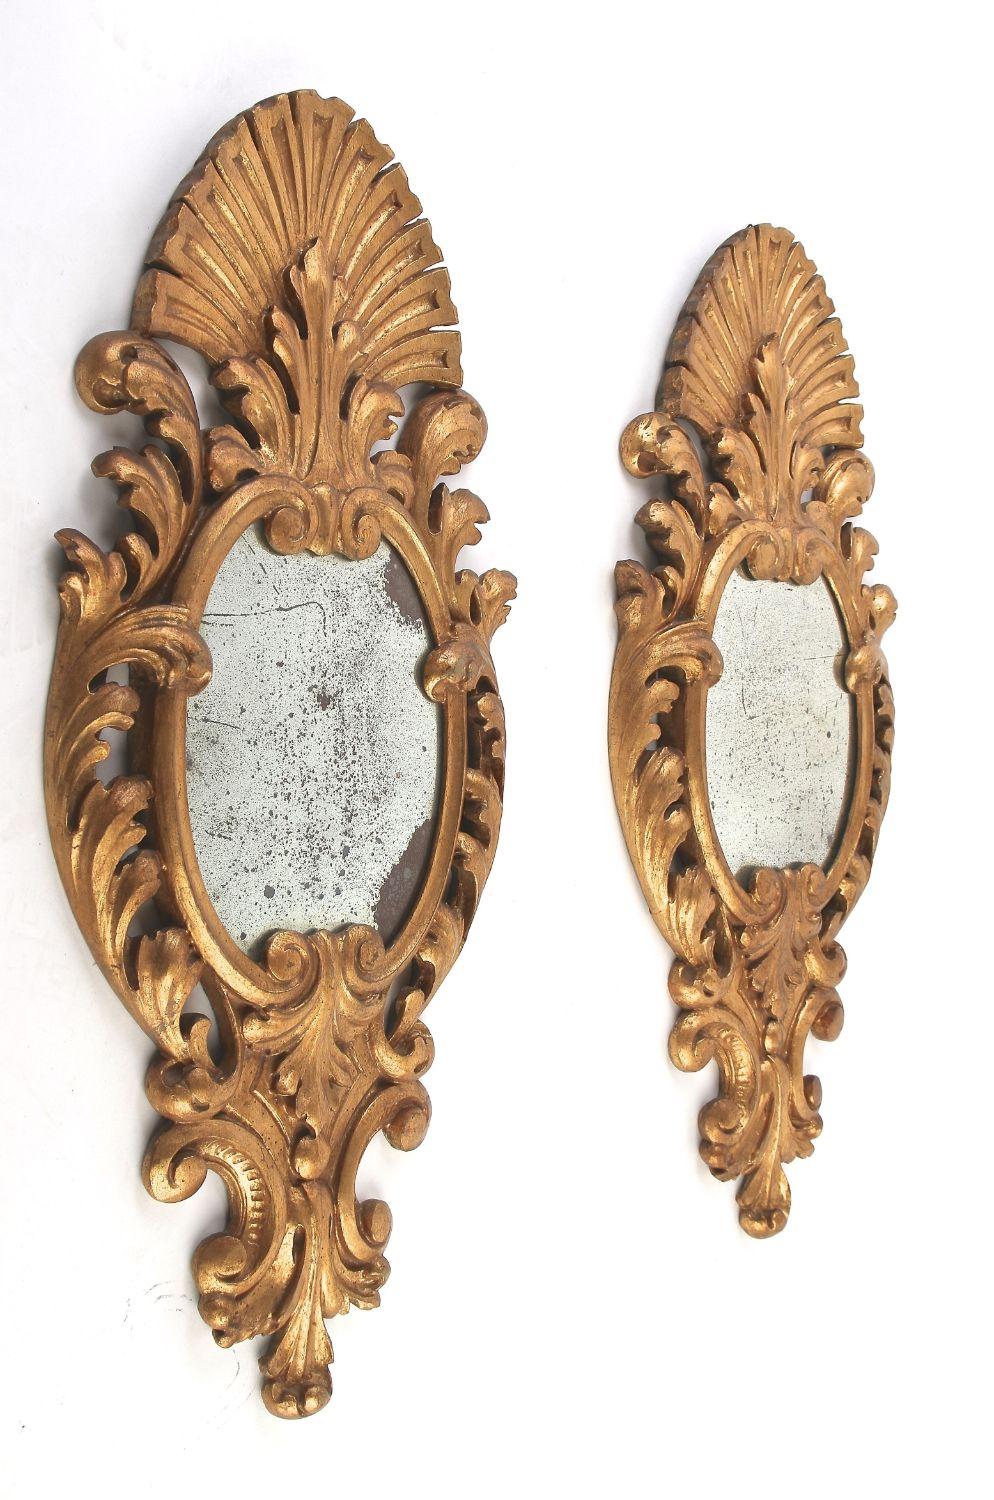 Remarkable pair of amazing crafted gilt wall mirrors from the mid 19th century in Italy. Elaborately hand carved out of basswood around 1850, these outstanding antique gilt mirrors show an absolute enchanting, elongated design with fantastic shaped